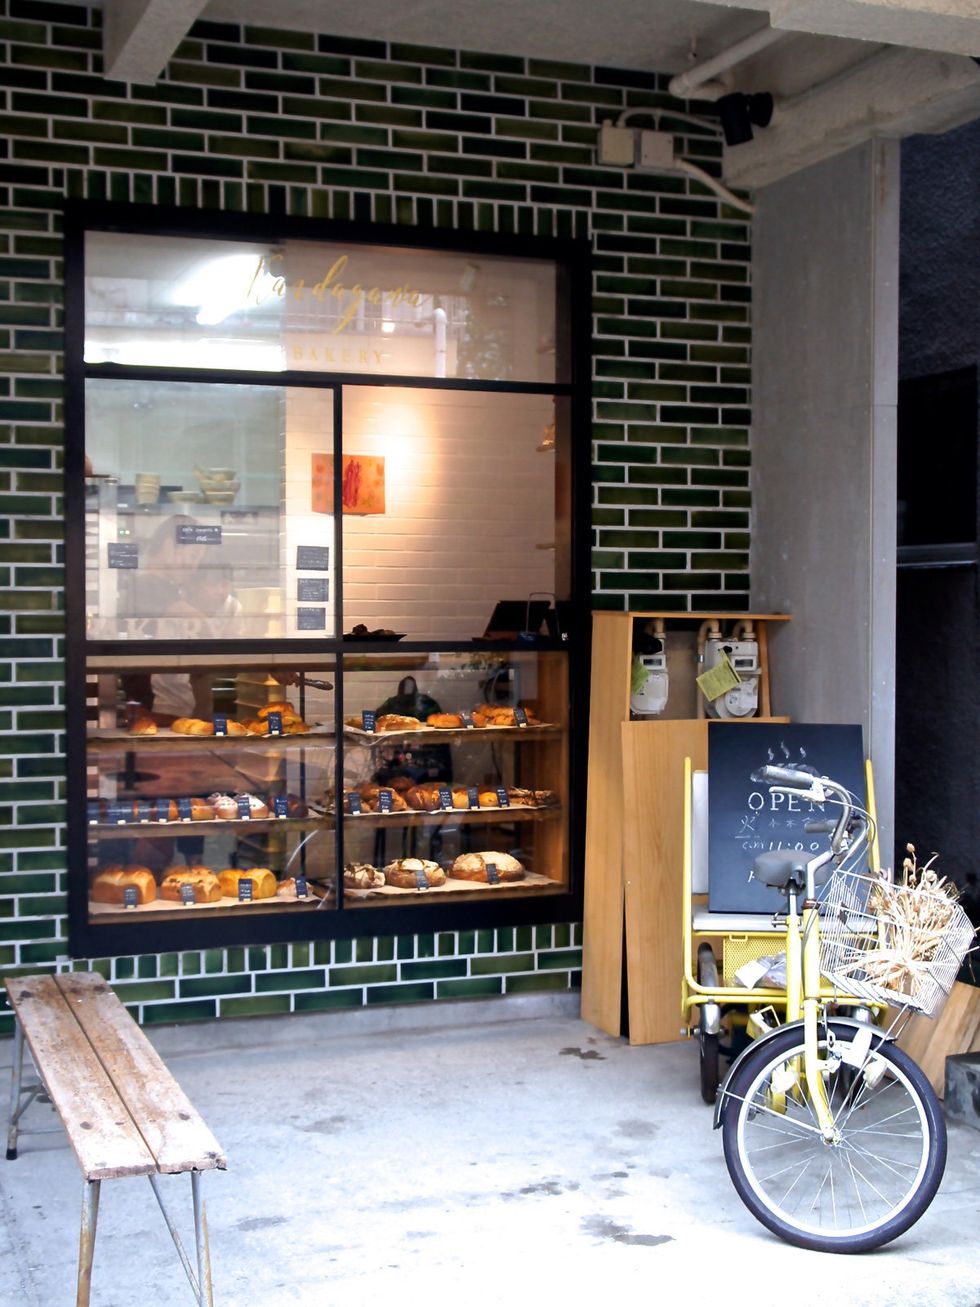 Building, Architecture, Furniture, Room, Interior design, Bakery, Table, Door, Vehicle, Bicycle, 